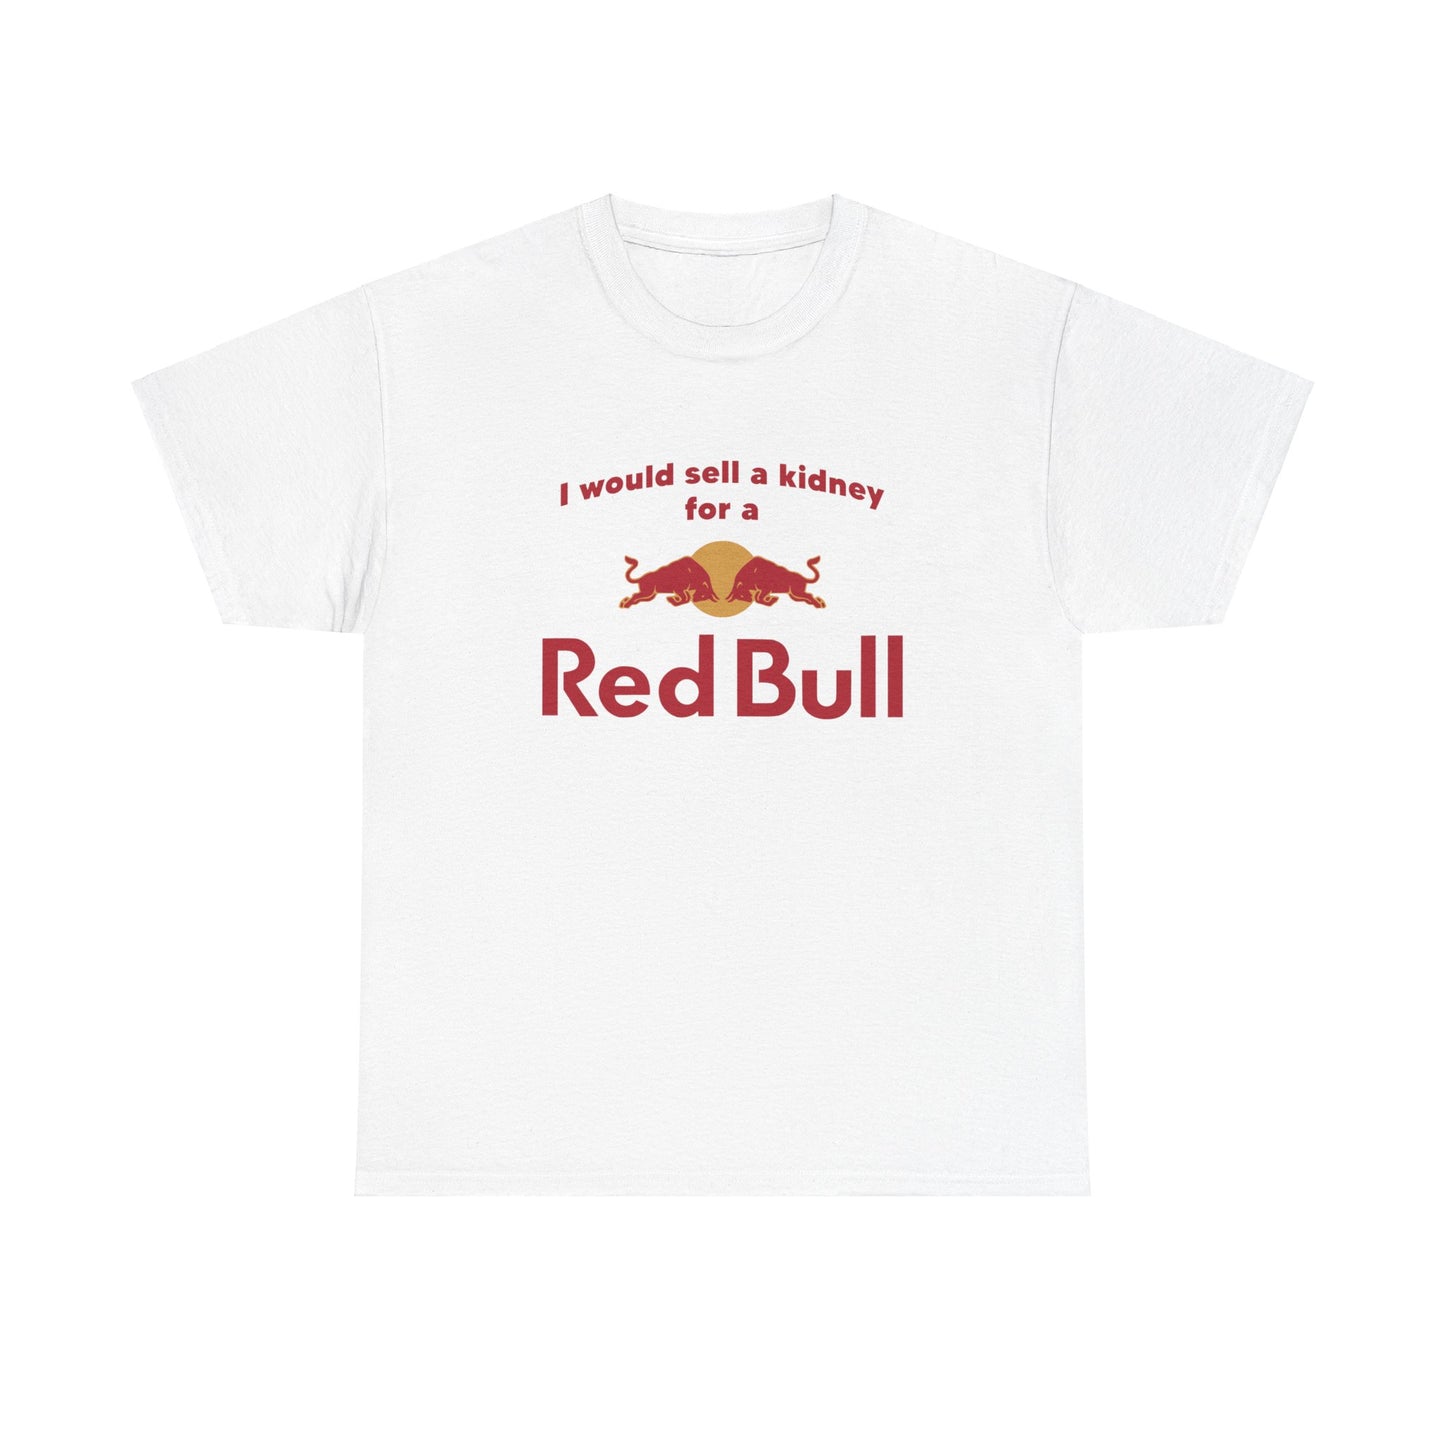 I WOULD SELL A KIDNEY FOR A REDBULL T-SHIRT